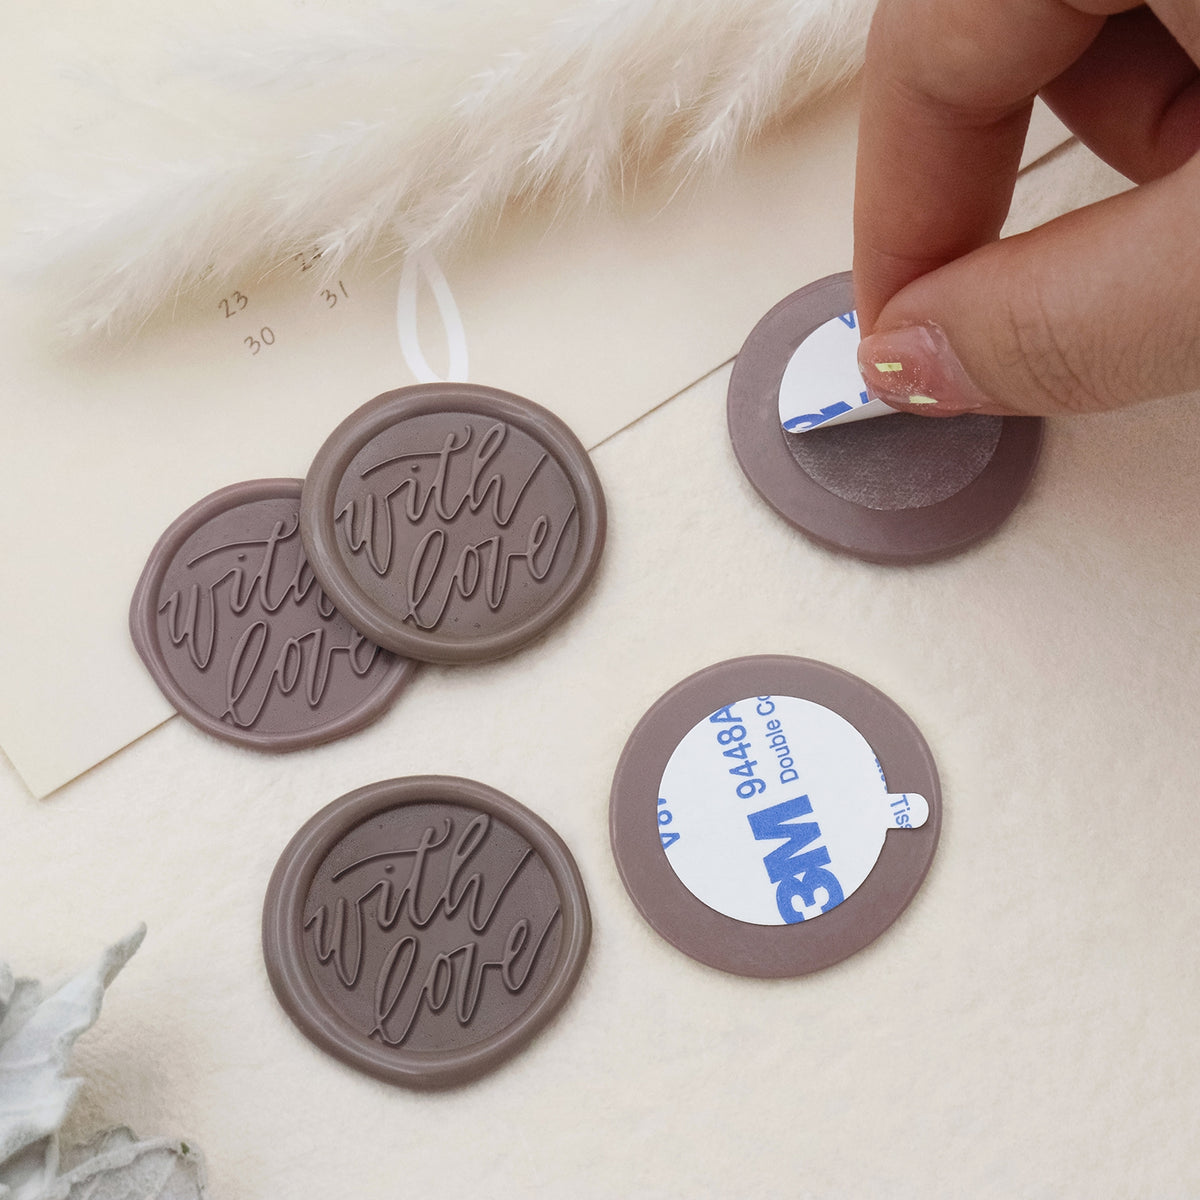 Stamprints Greeting Self-adhesive Wax Seal Stickers - With Love 2